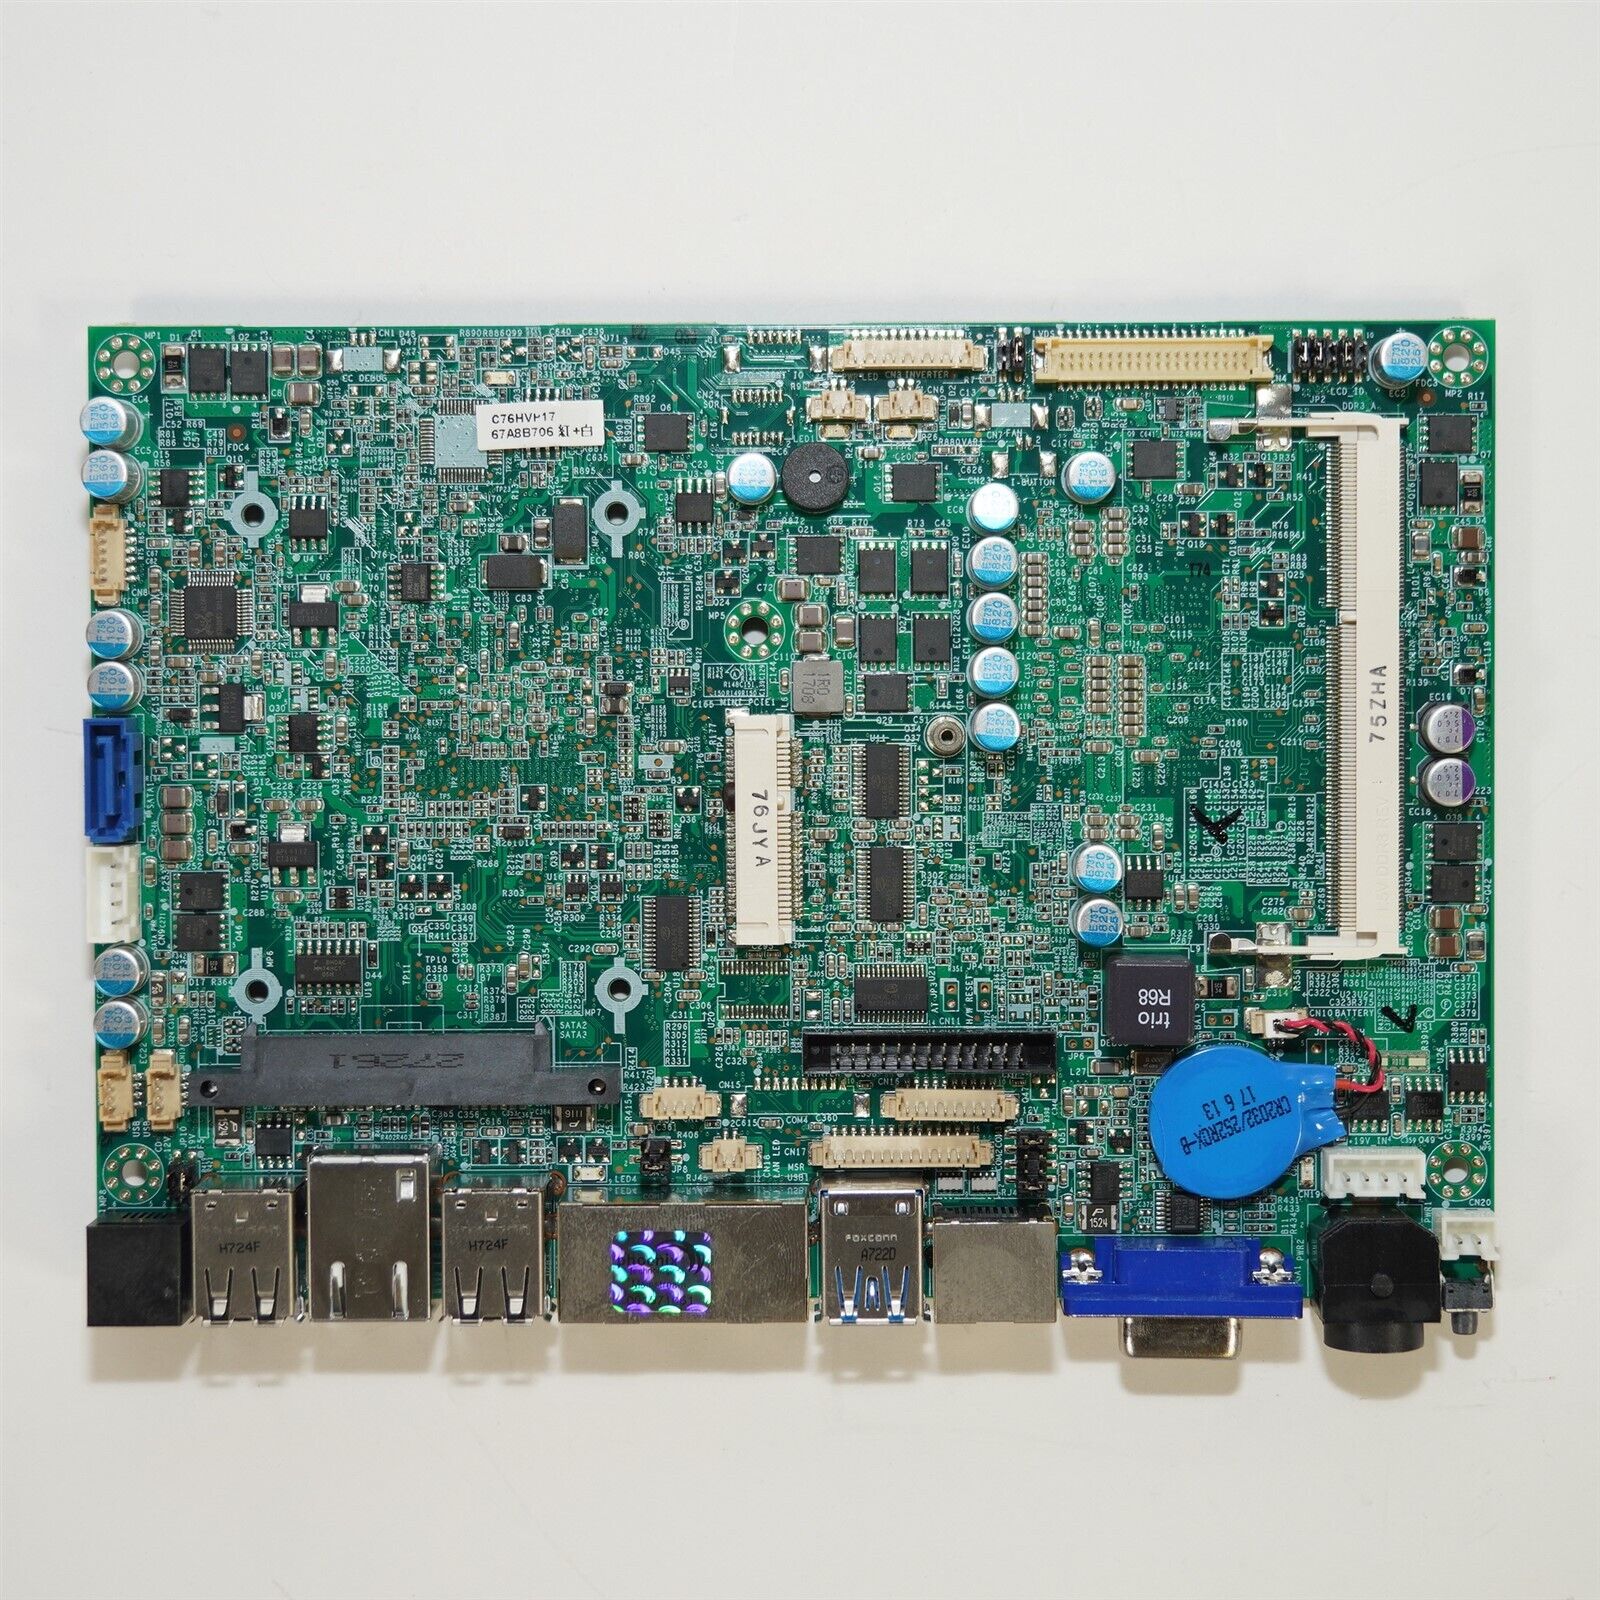 DigiPOS A350/A360/A380 POS Main System Board Motherboard with i3-3217U 1.8GHz 